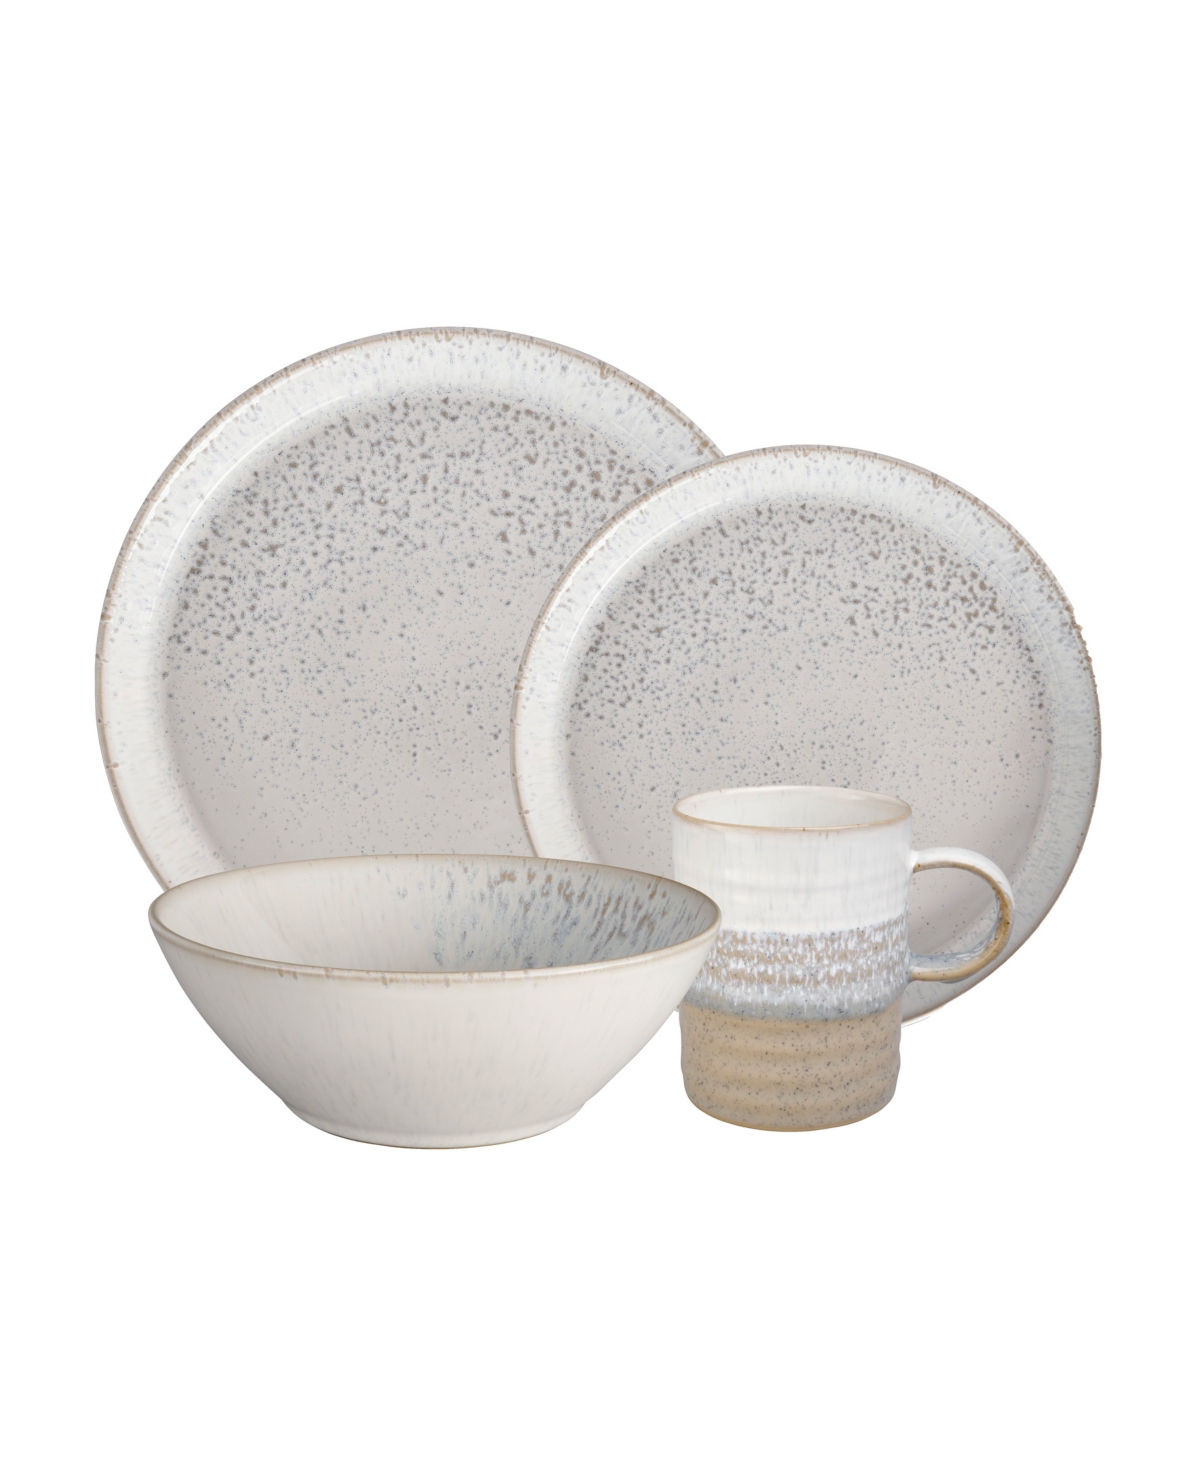 Kiln Collection 4 Piece Place Setting - Natural/white